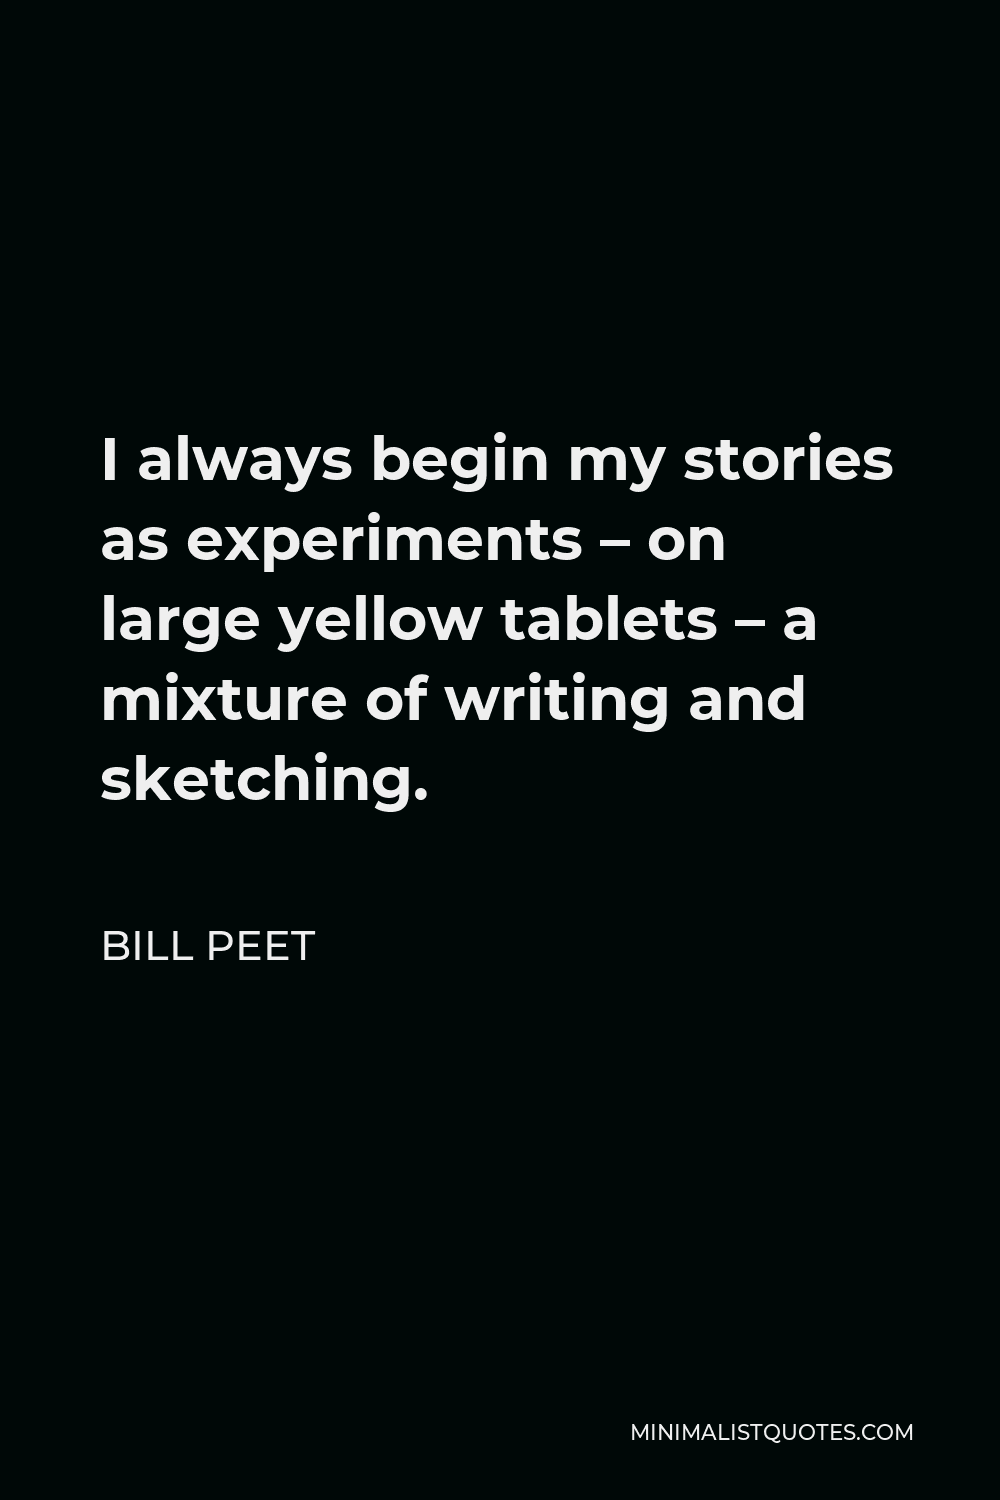 Bill Peet Quote - I always begin my stories as experiments – on large yellow tablets – a mixture of writing and sketching.